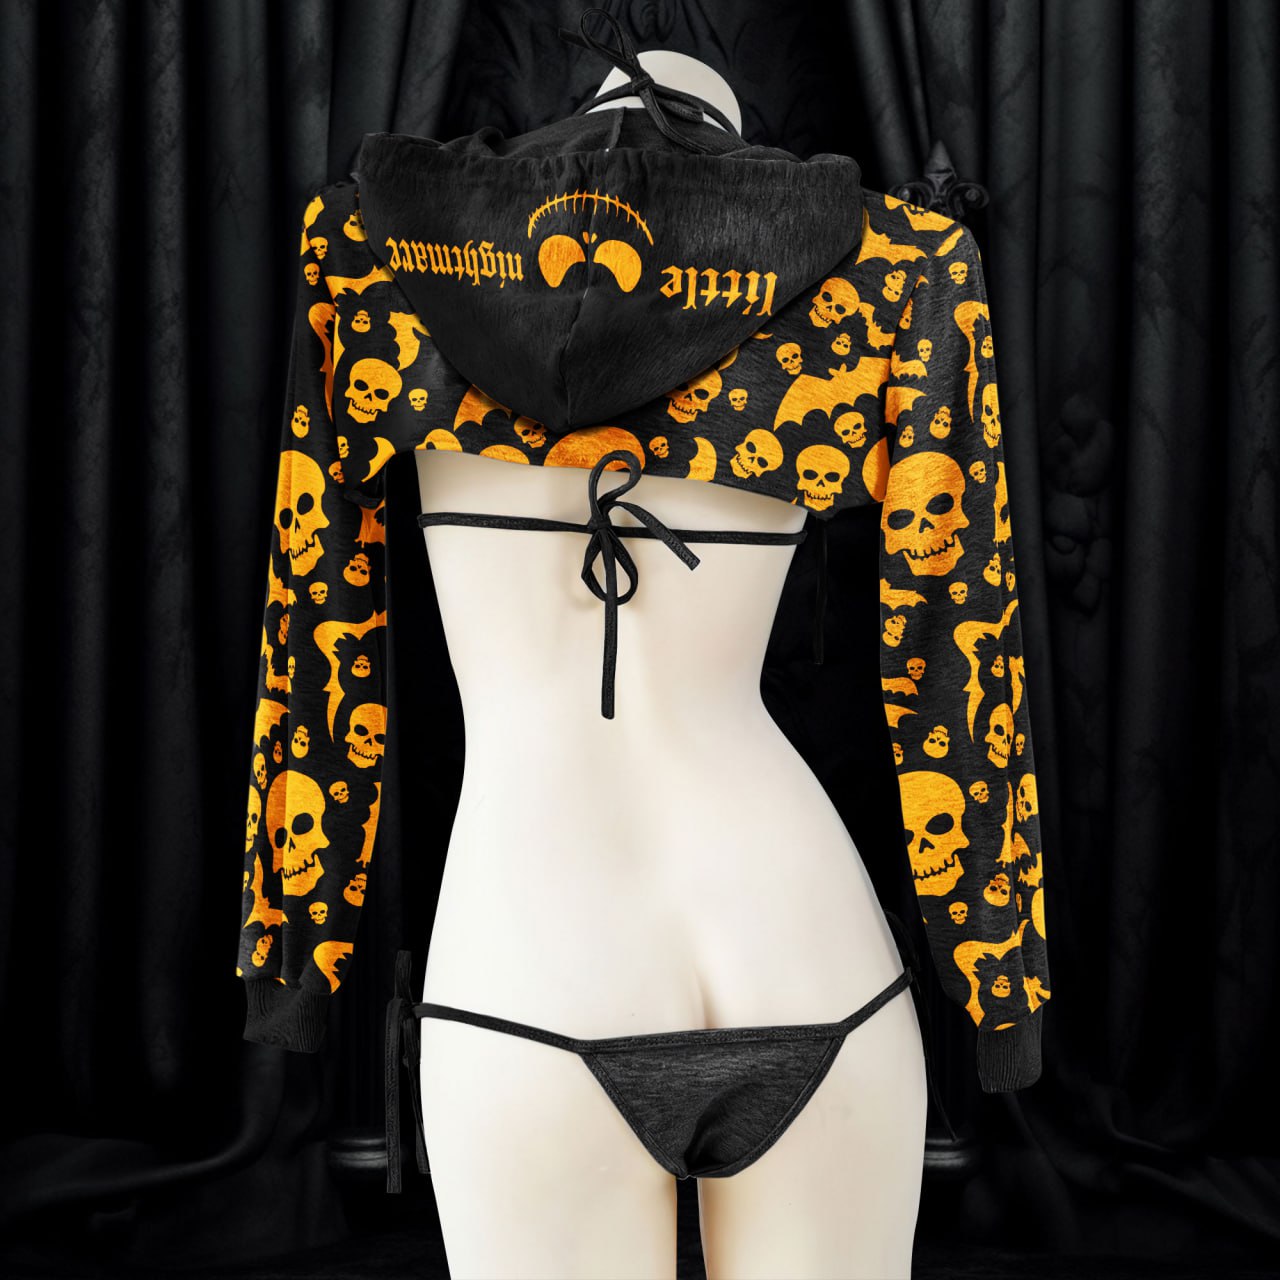 An alluring and seductive lingerie set with a gothic style, featuring intricate details and a unique print that makes it perfect for Halloween or any daring occasion. The set includes a top and bottom, both designed to fit perfectly and enhance the wearer's curves, making her feel confident and empowered.